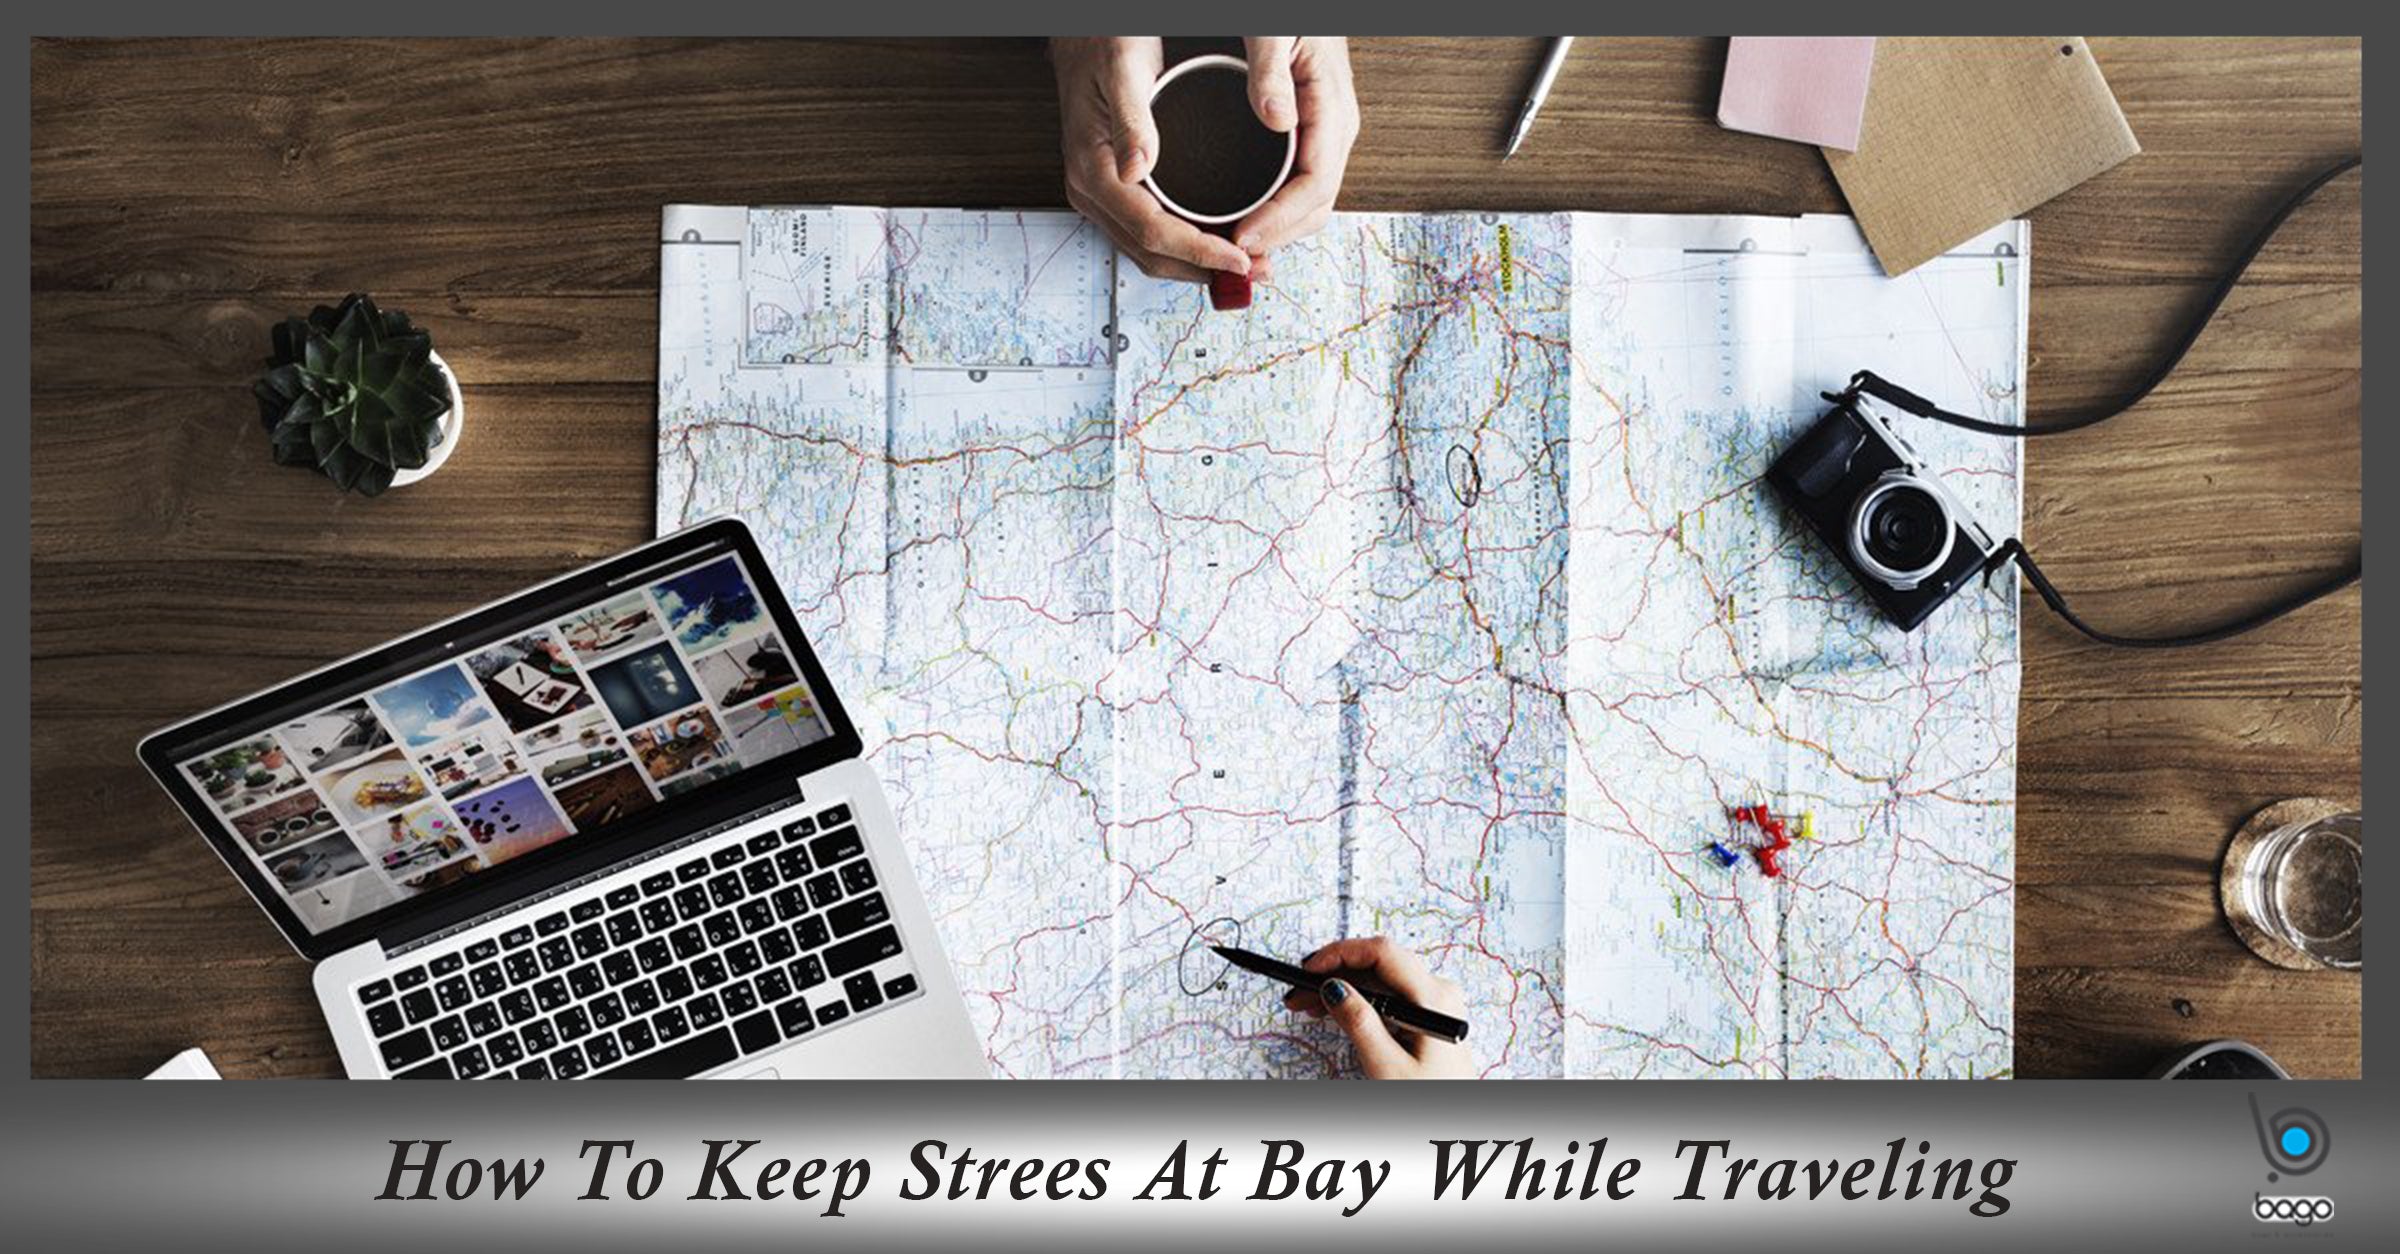 How To Keep Stress At Bay While Traveling